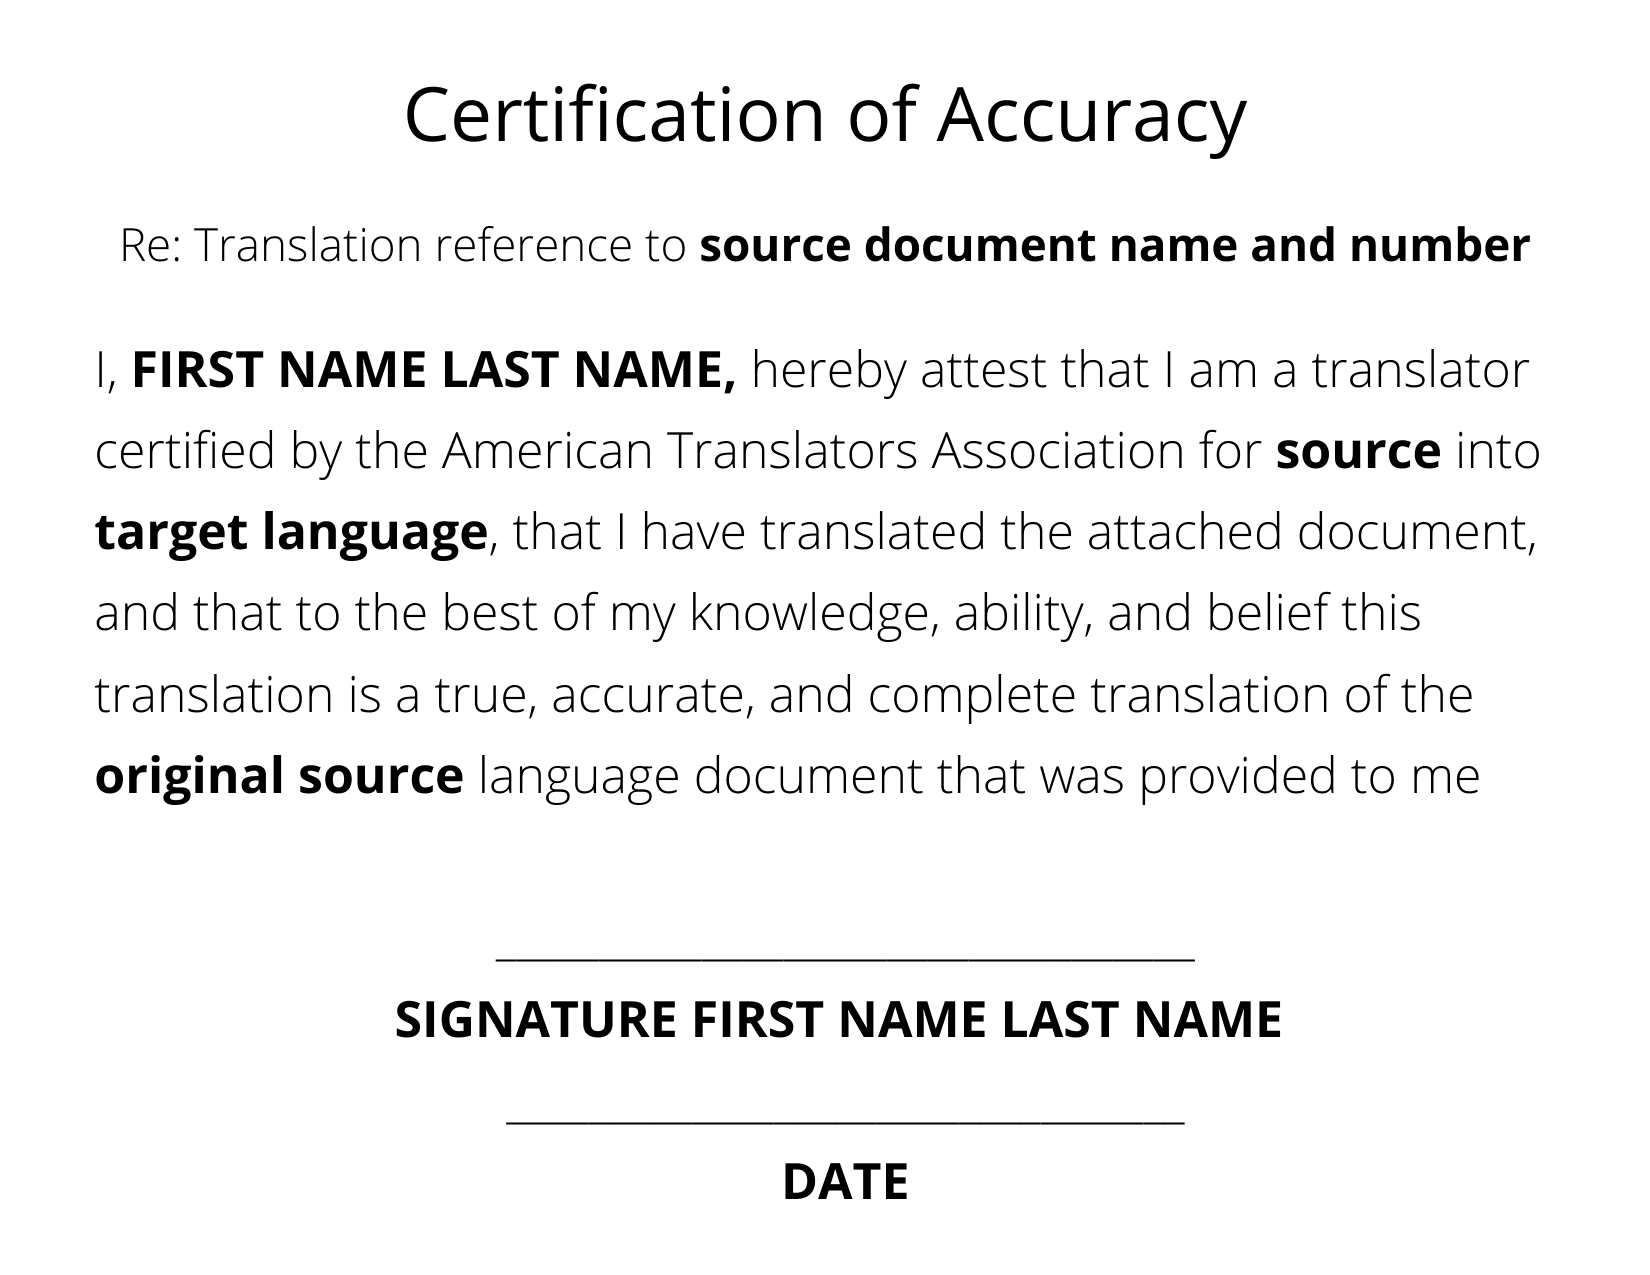 US Certificate of Accuracy